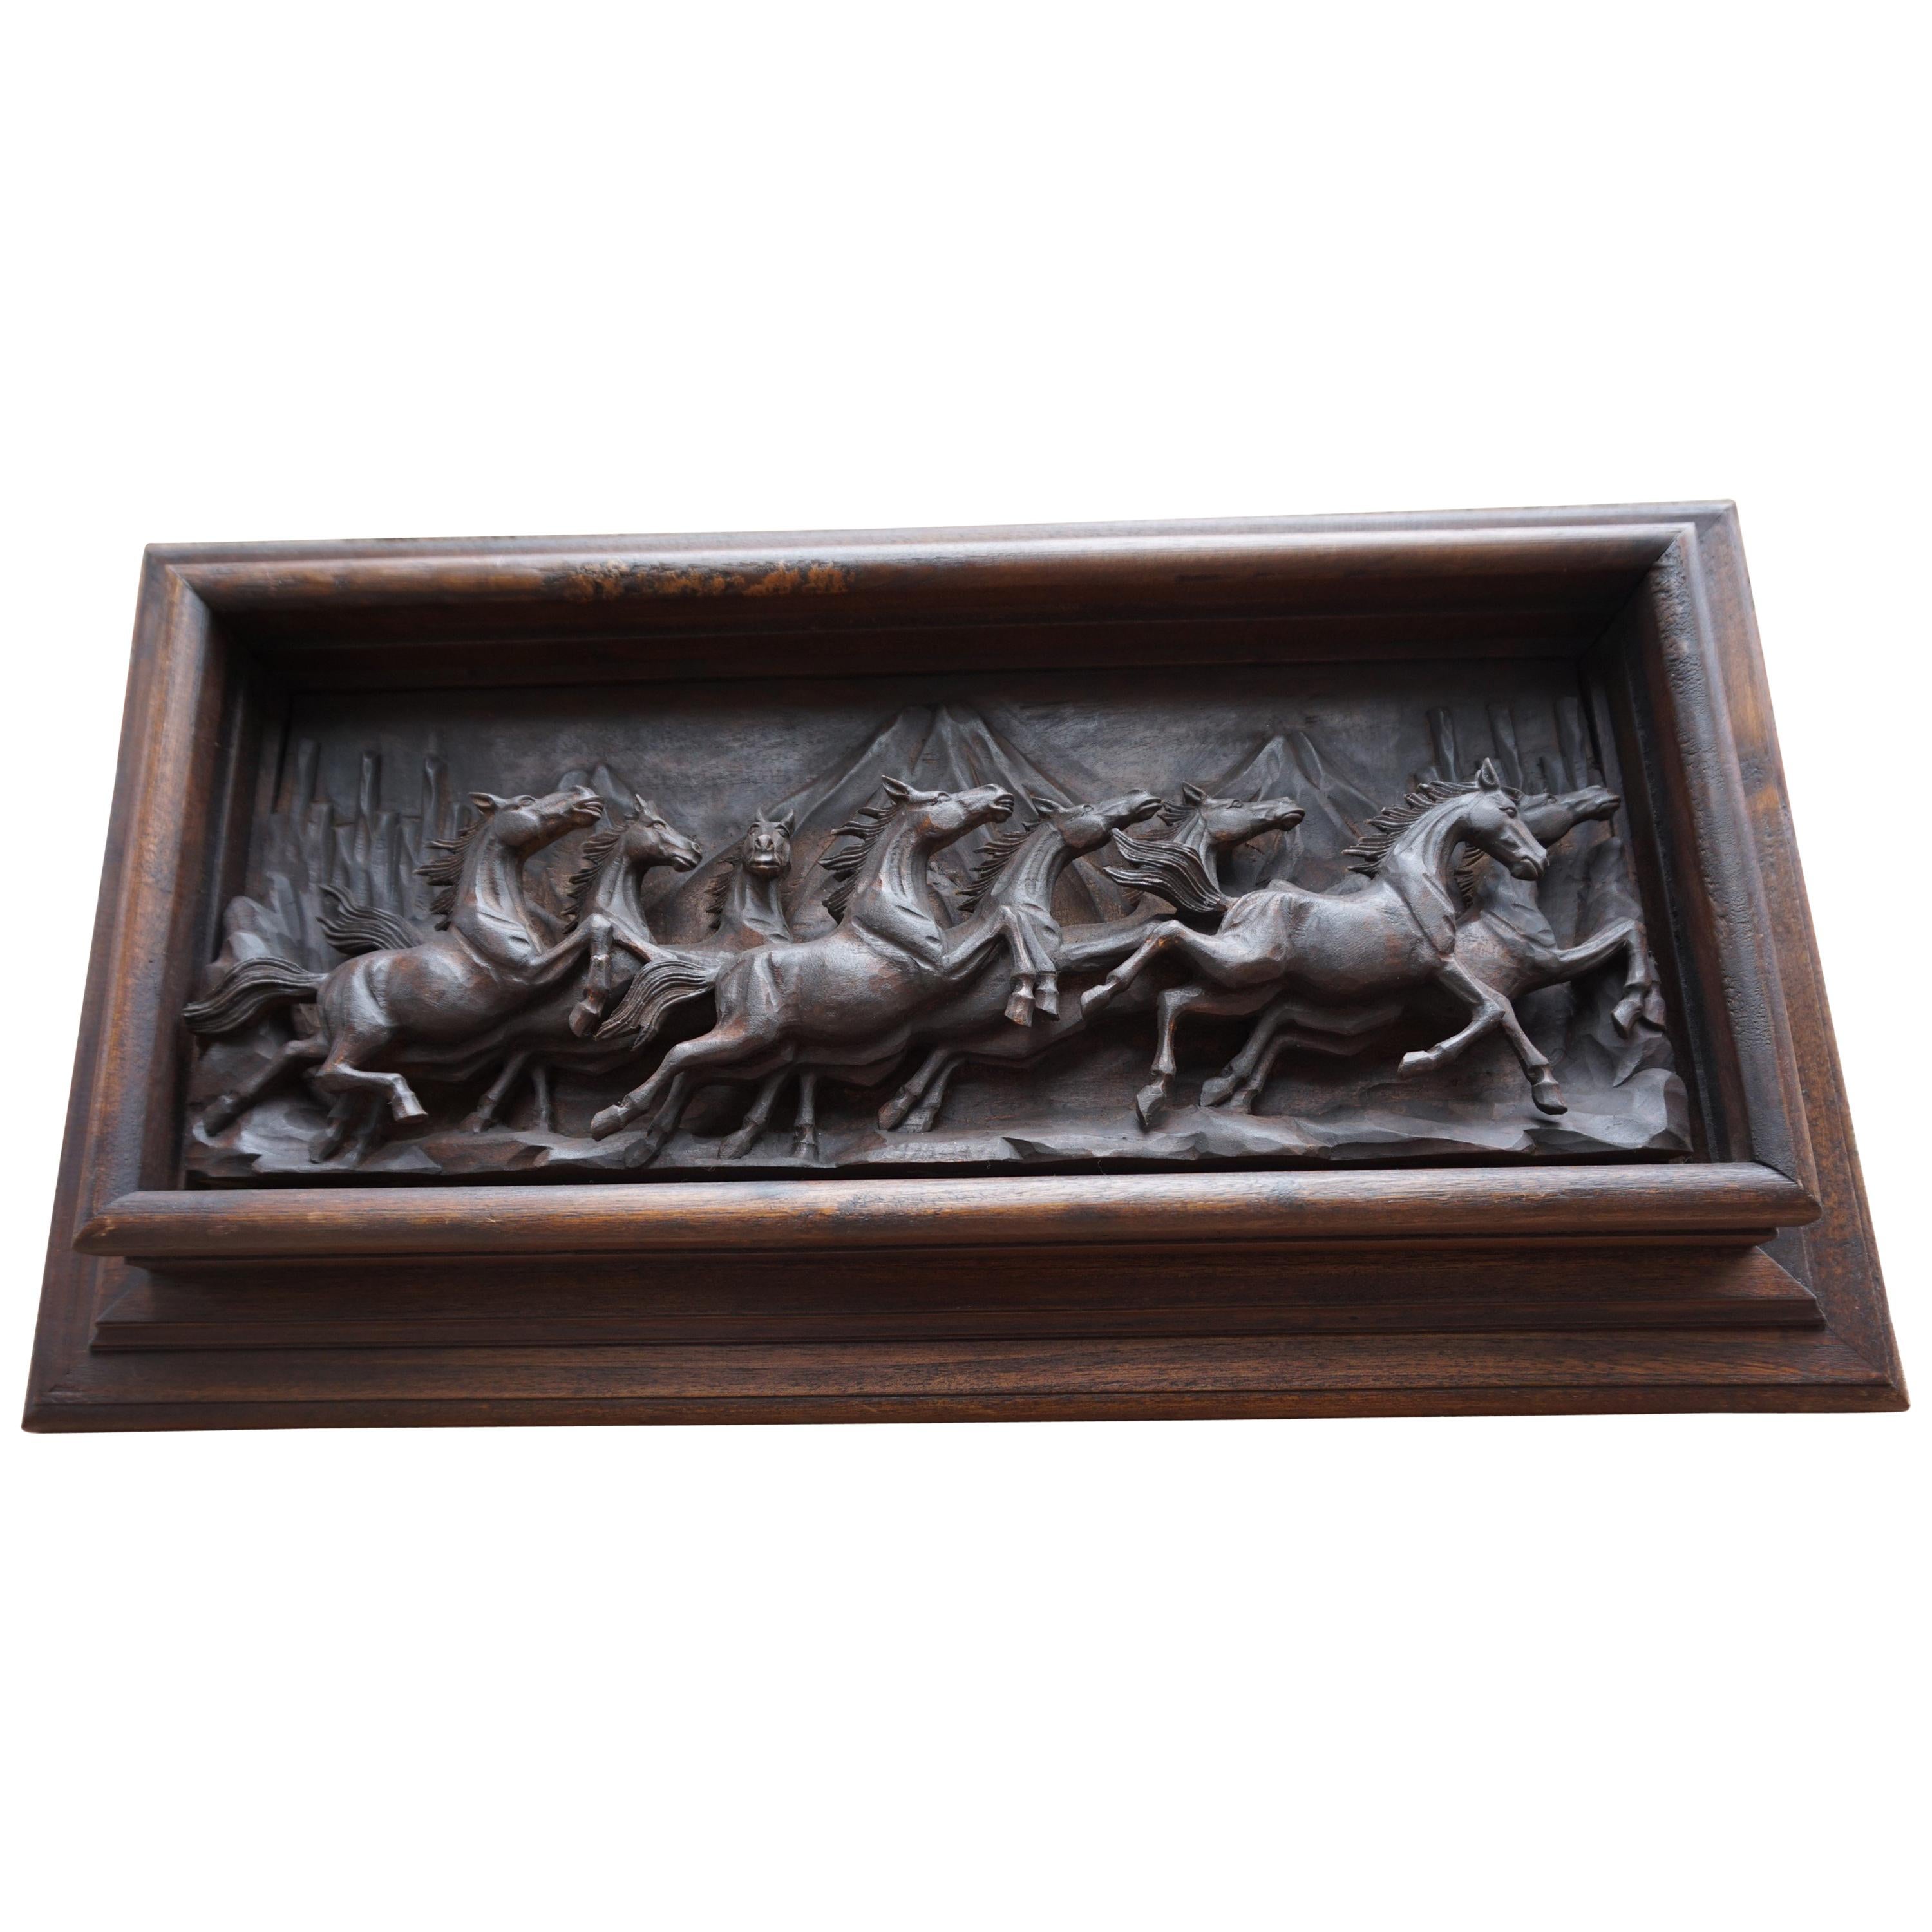 Hand-Carved Wall Plaque with Eight Wild Horses / Horse Sculptures in Deep Relief